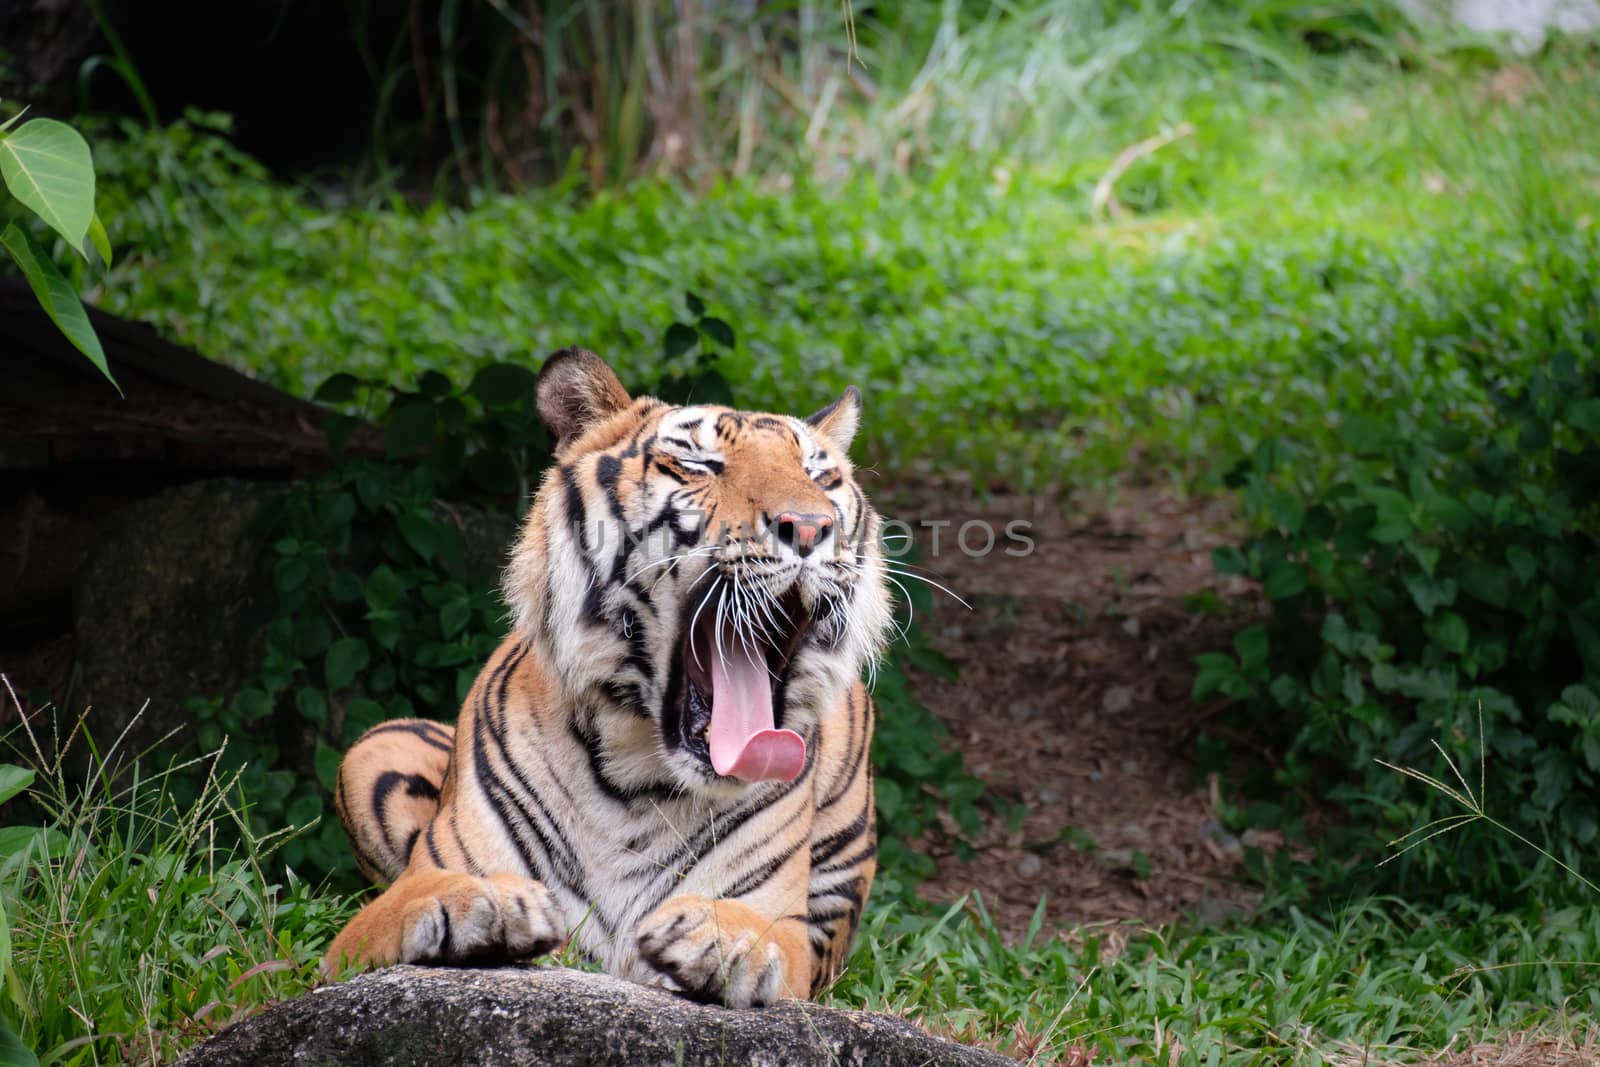 Tiger is yawning in the green forest.